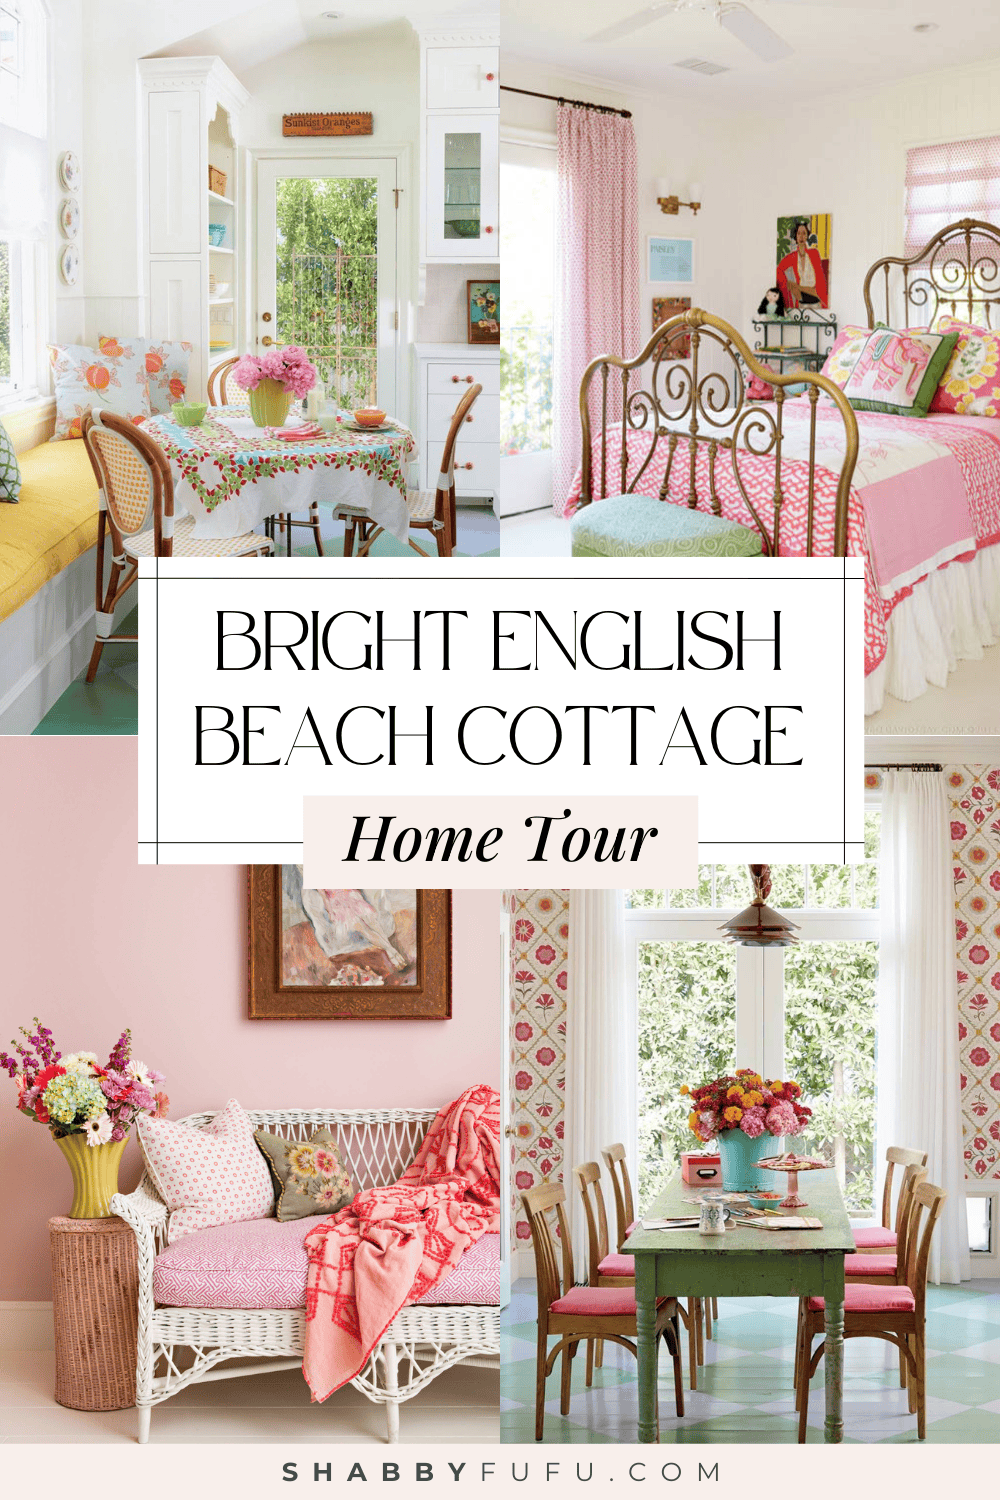 Pinterest decorative grphic featuring a collage of interior design houses titled  "Bright English Beach Cottage Home Tour"